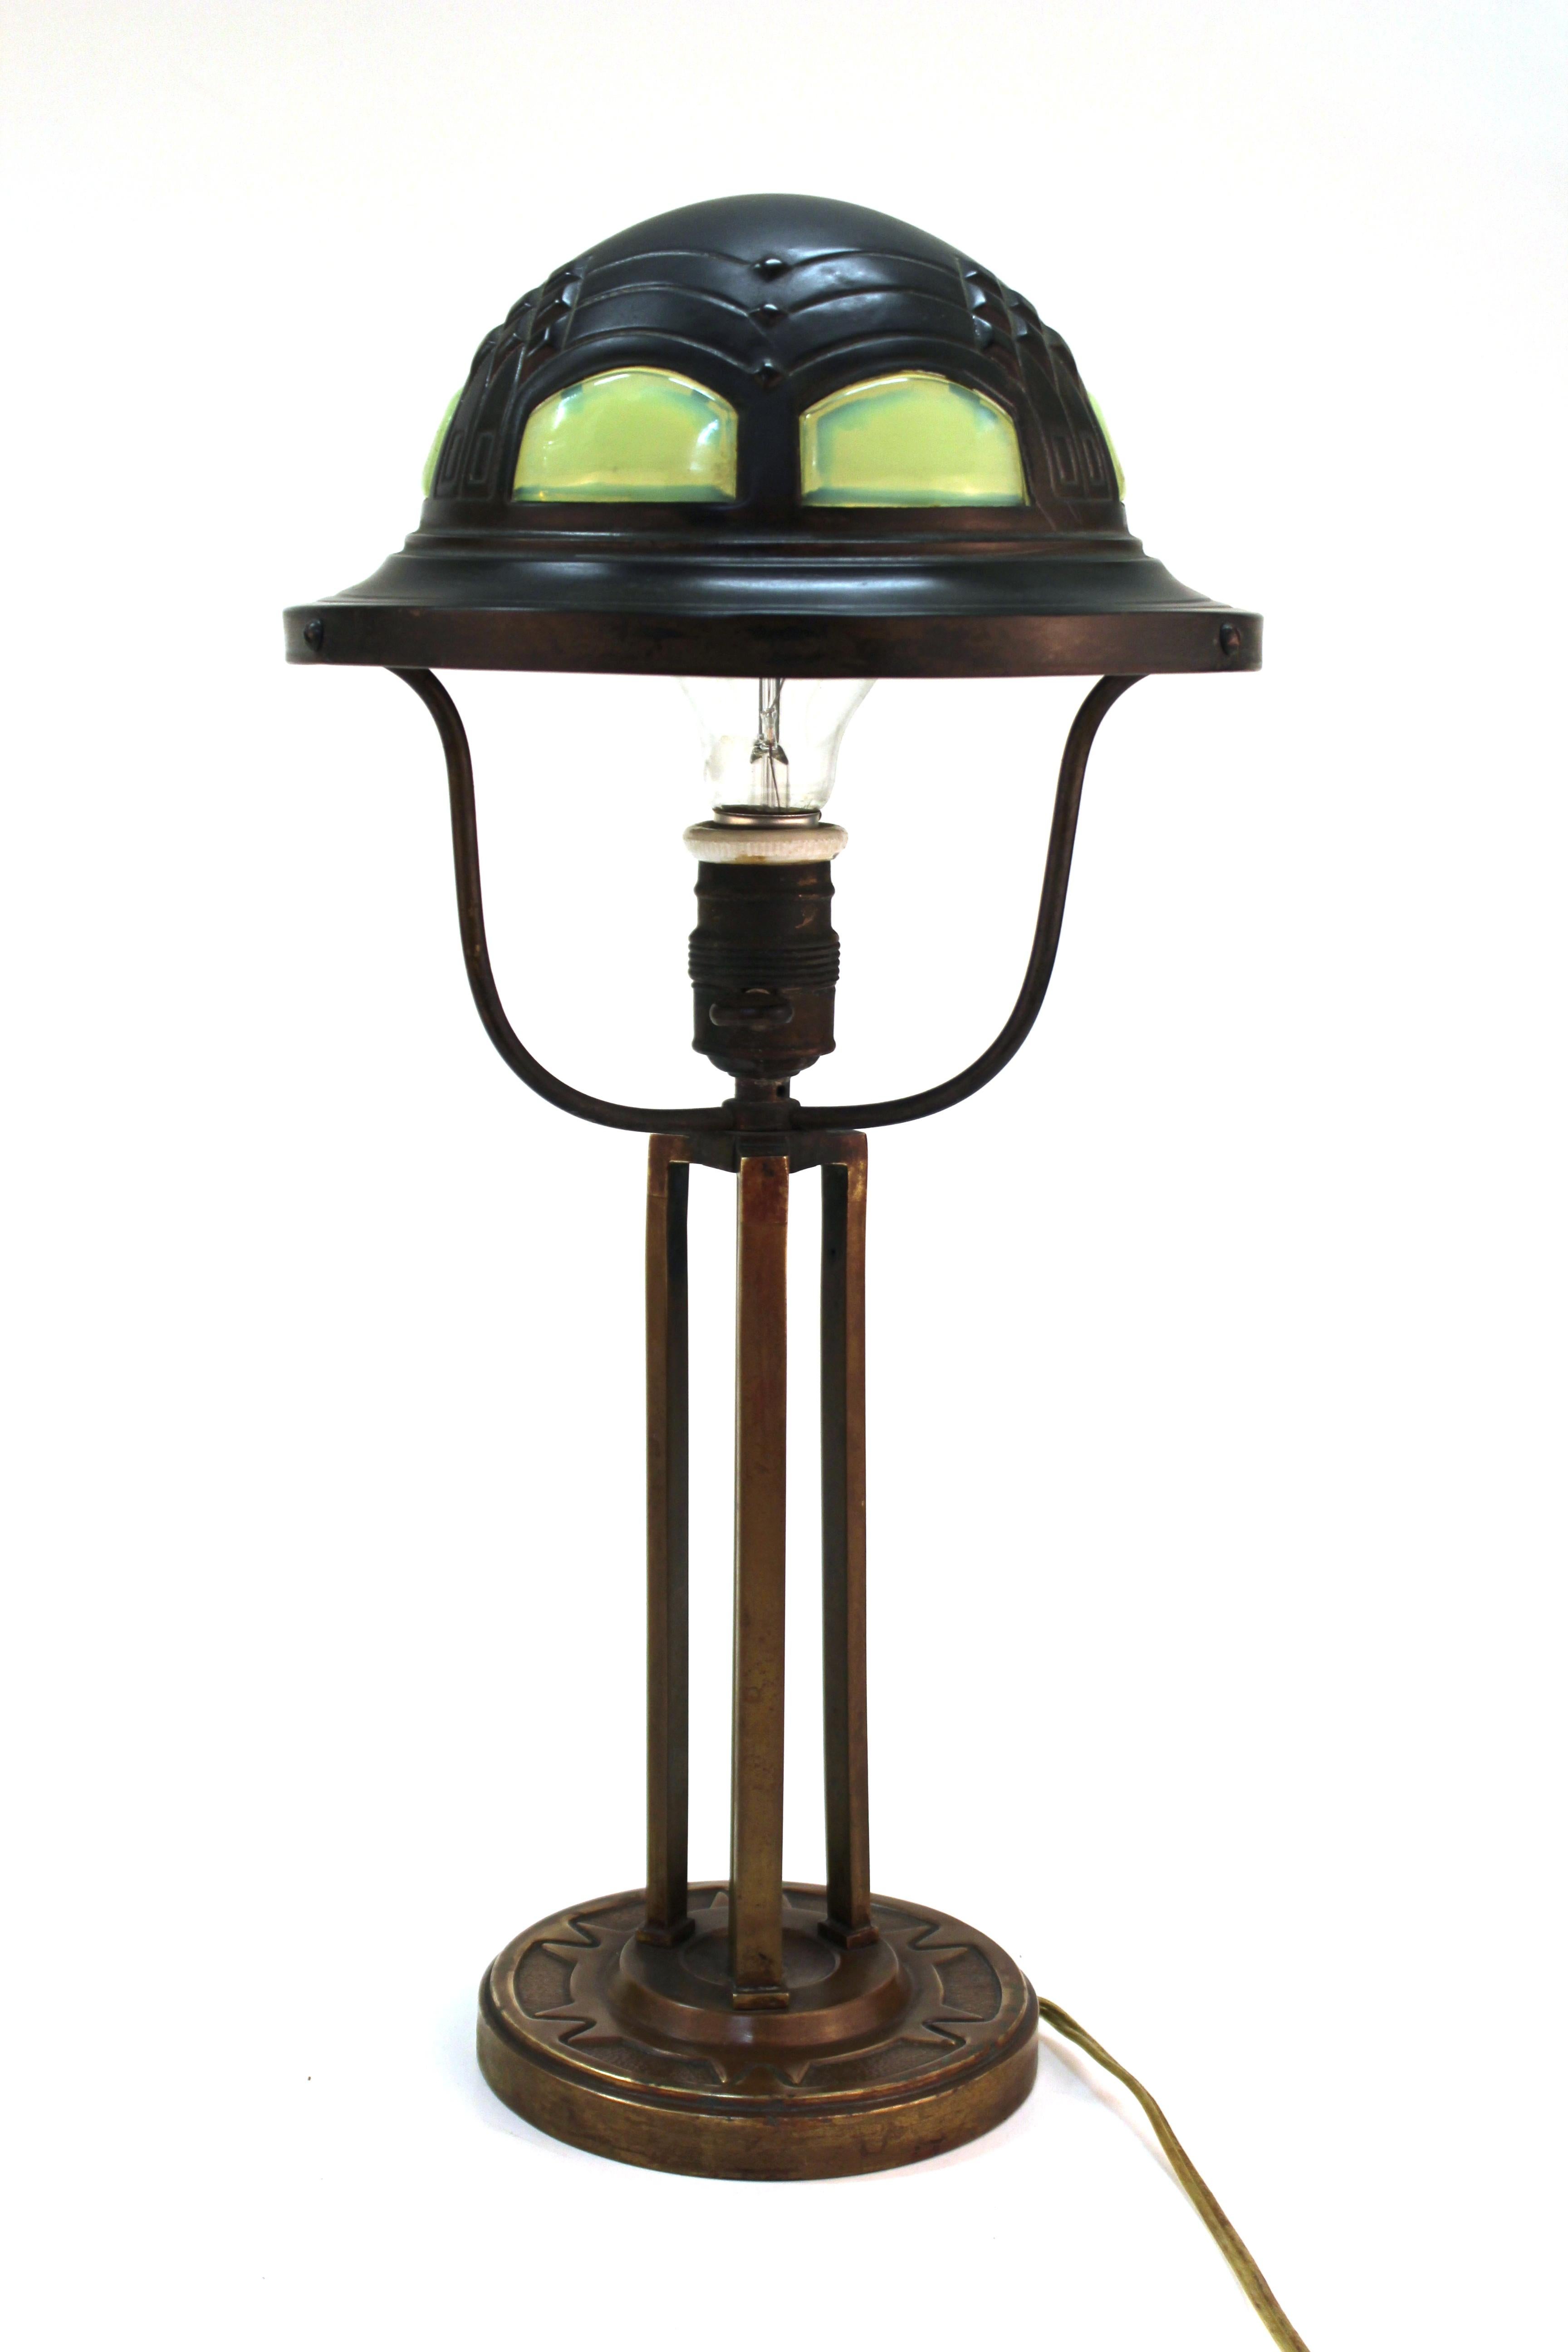 German Jugendstil table lamp attributed to architect and designer Peter Behrens from the Darmstadt Artists' Colony. The piece has a brass shade with inset opalescent art glass elements, atop a bronze base. Created in circa 1900. In great vintage